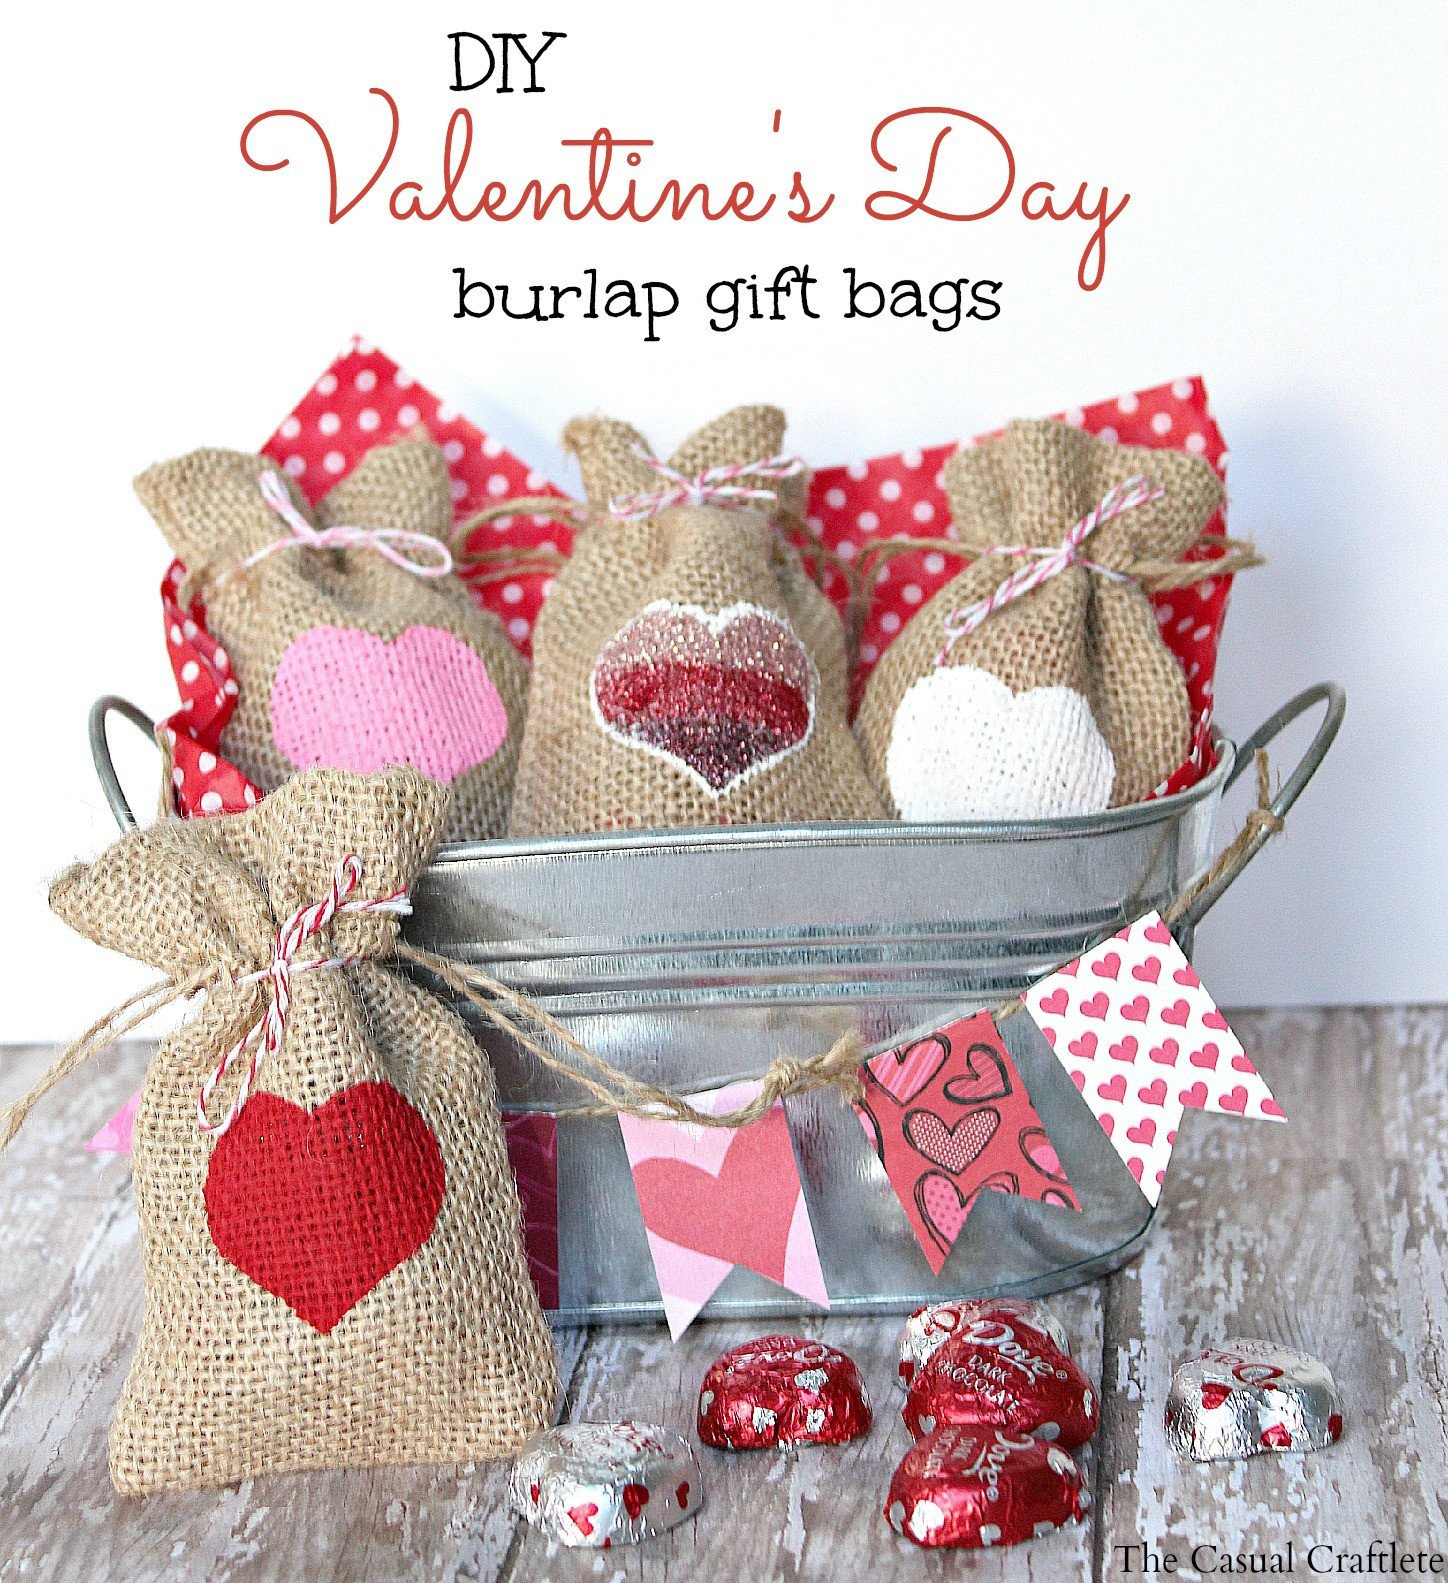 Valentines Day Homemade Gift
 DIY Valentine s Day Burlap Gift Bags